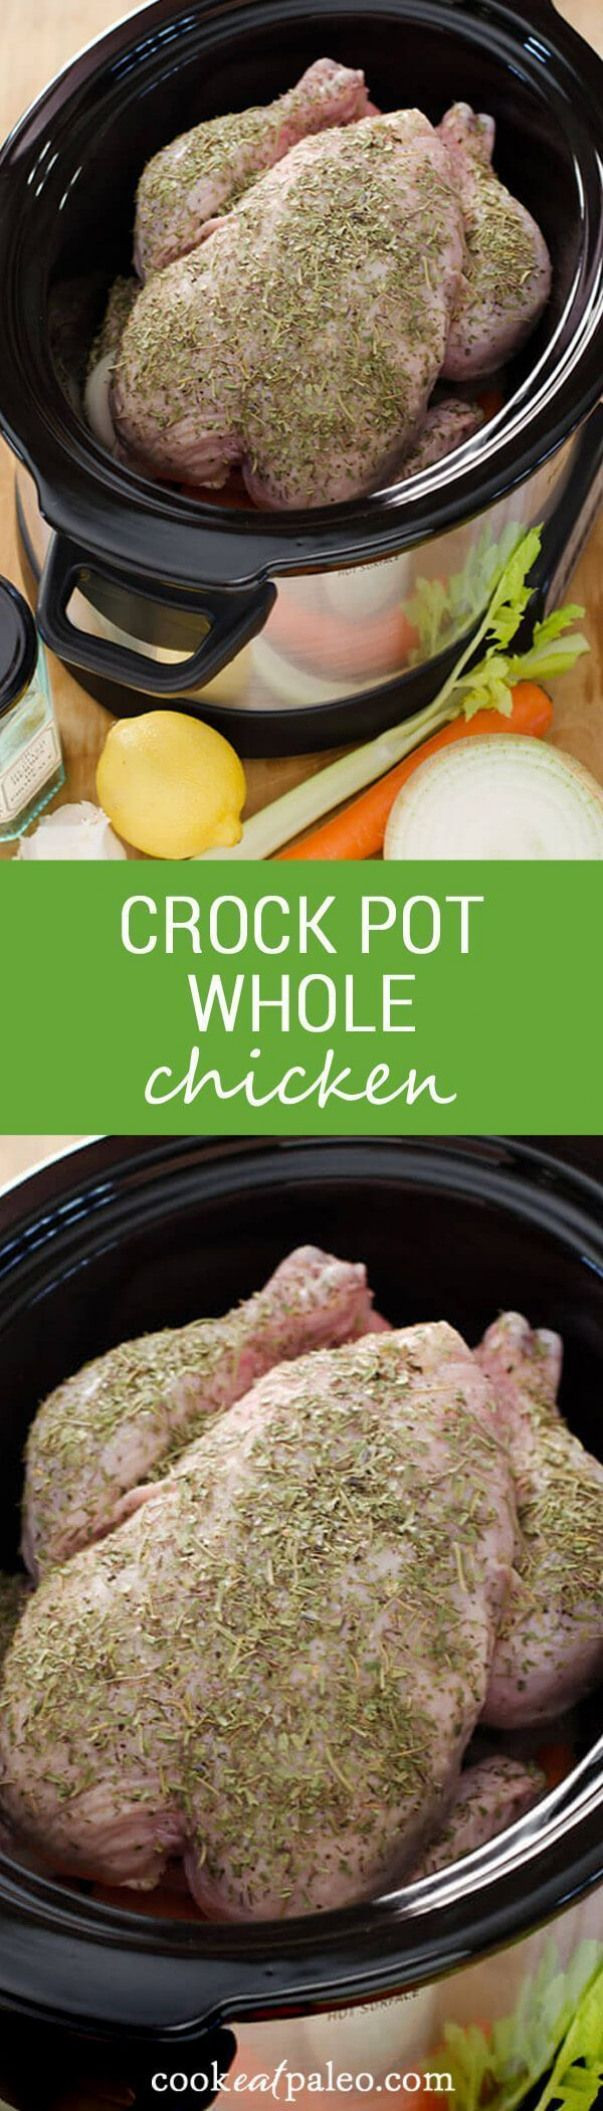 Whole Chicken In The Crockpot Keto
 Making a crock pot whole chicken is an easy way to prep